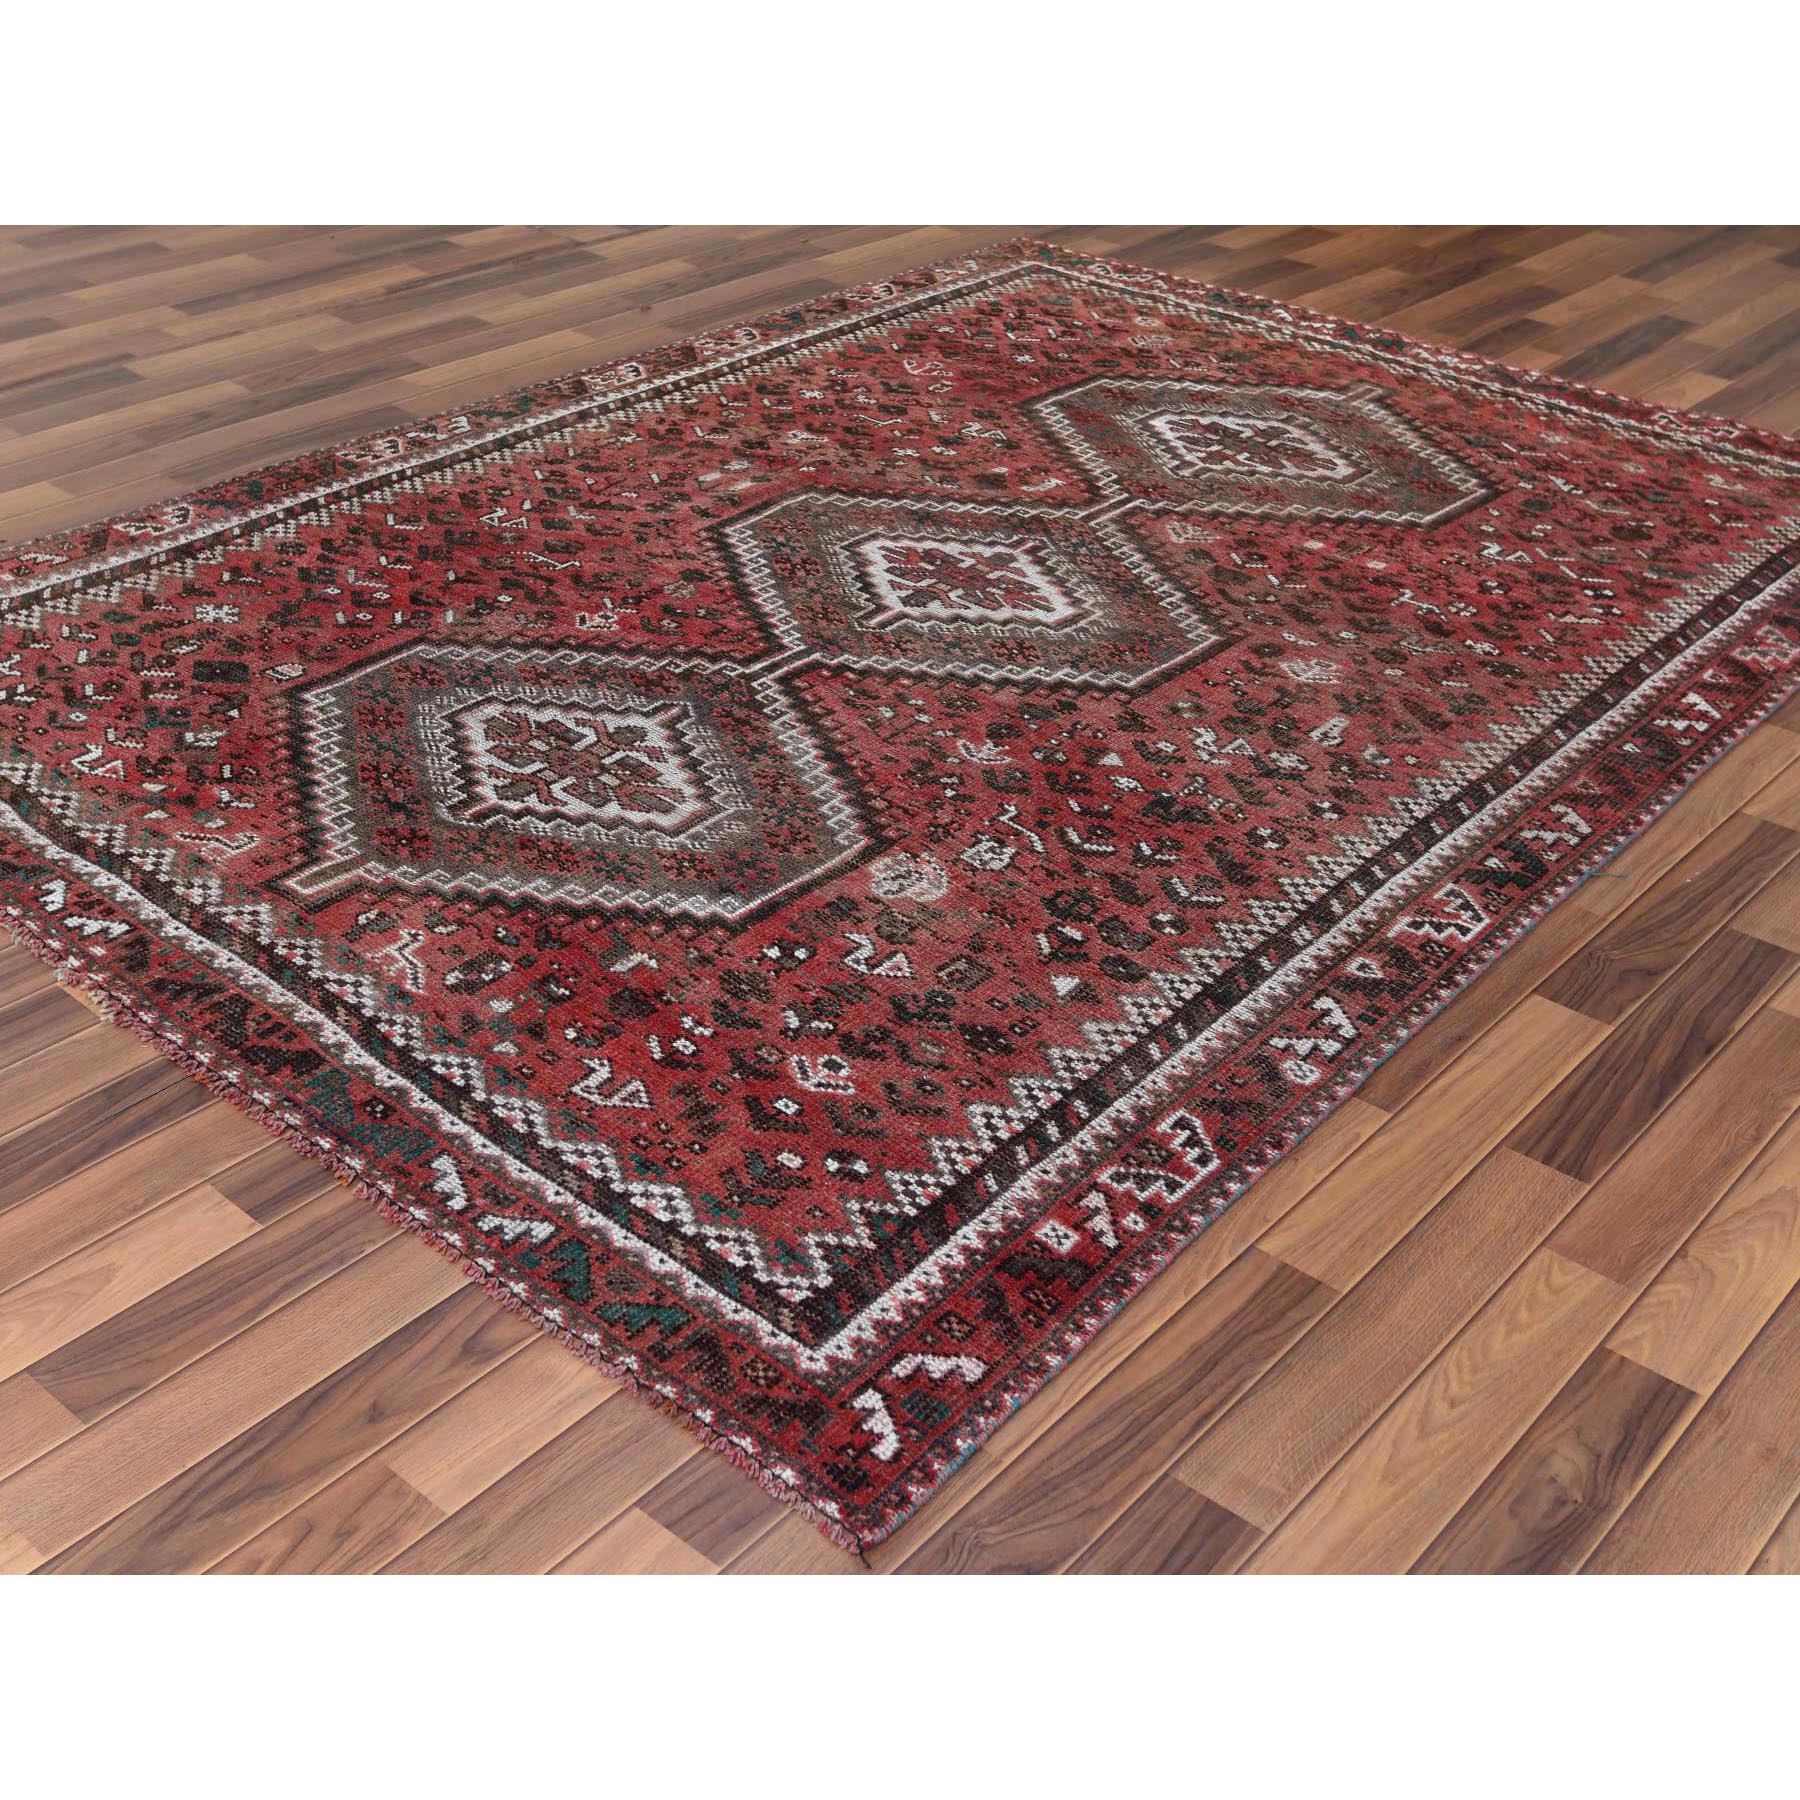 6'9"x9'6" Red Vintage and Worn Down Geometric Design Persian Shiraz Clean Hand Woven Oriental Rug 